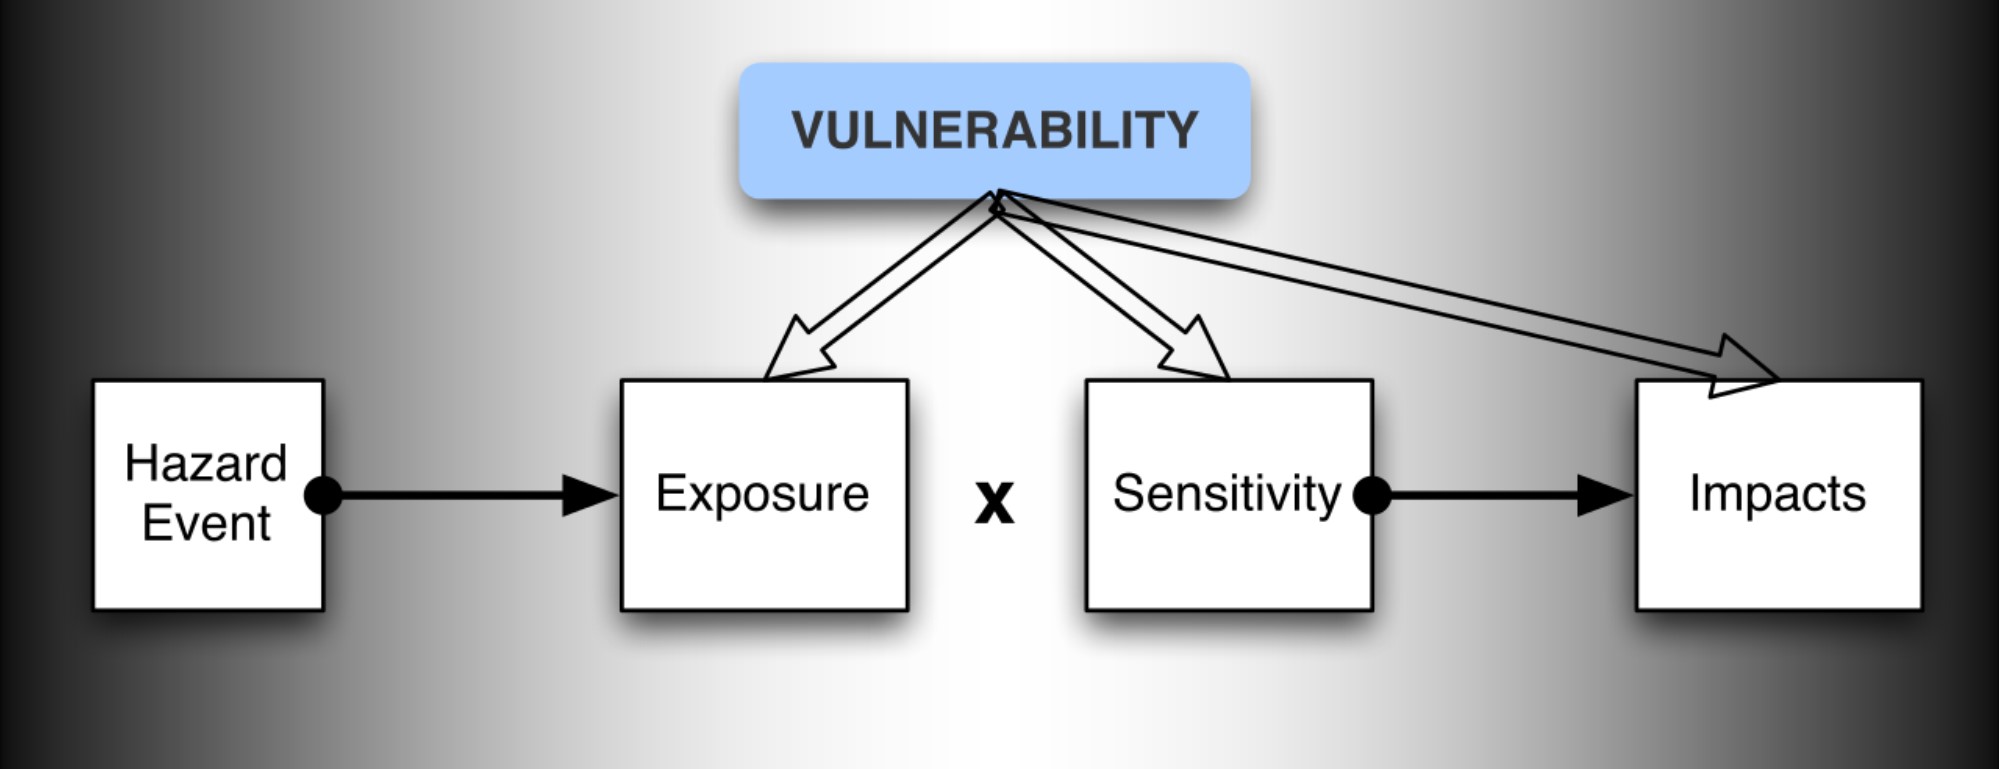 What is vulnerability identification in disaster management?